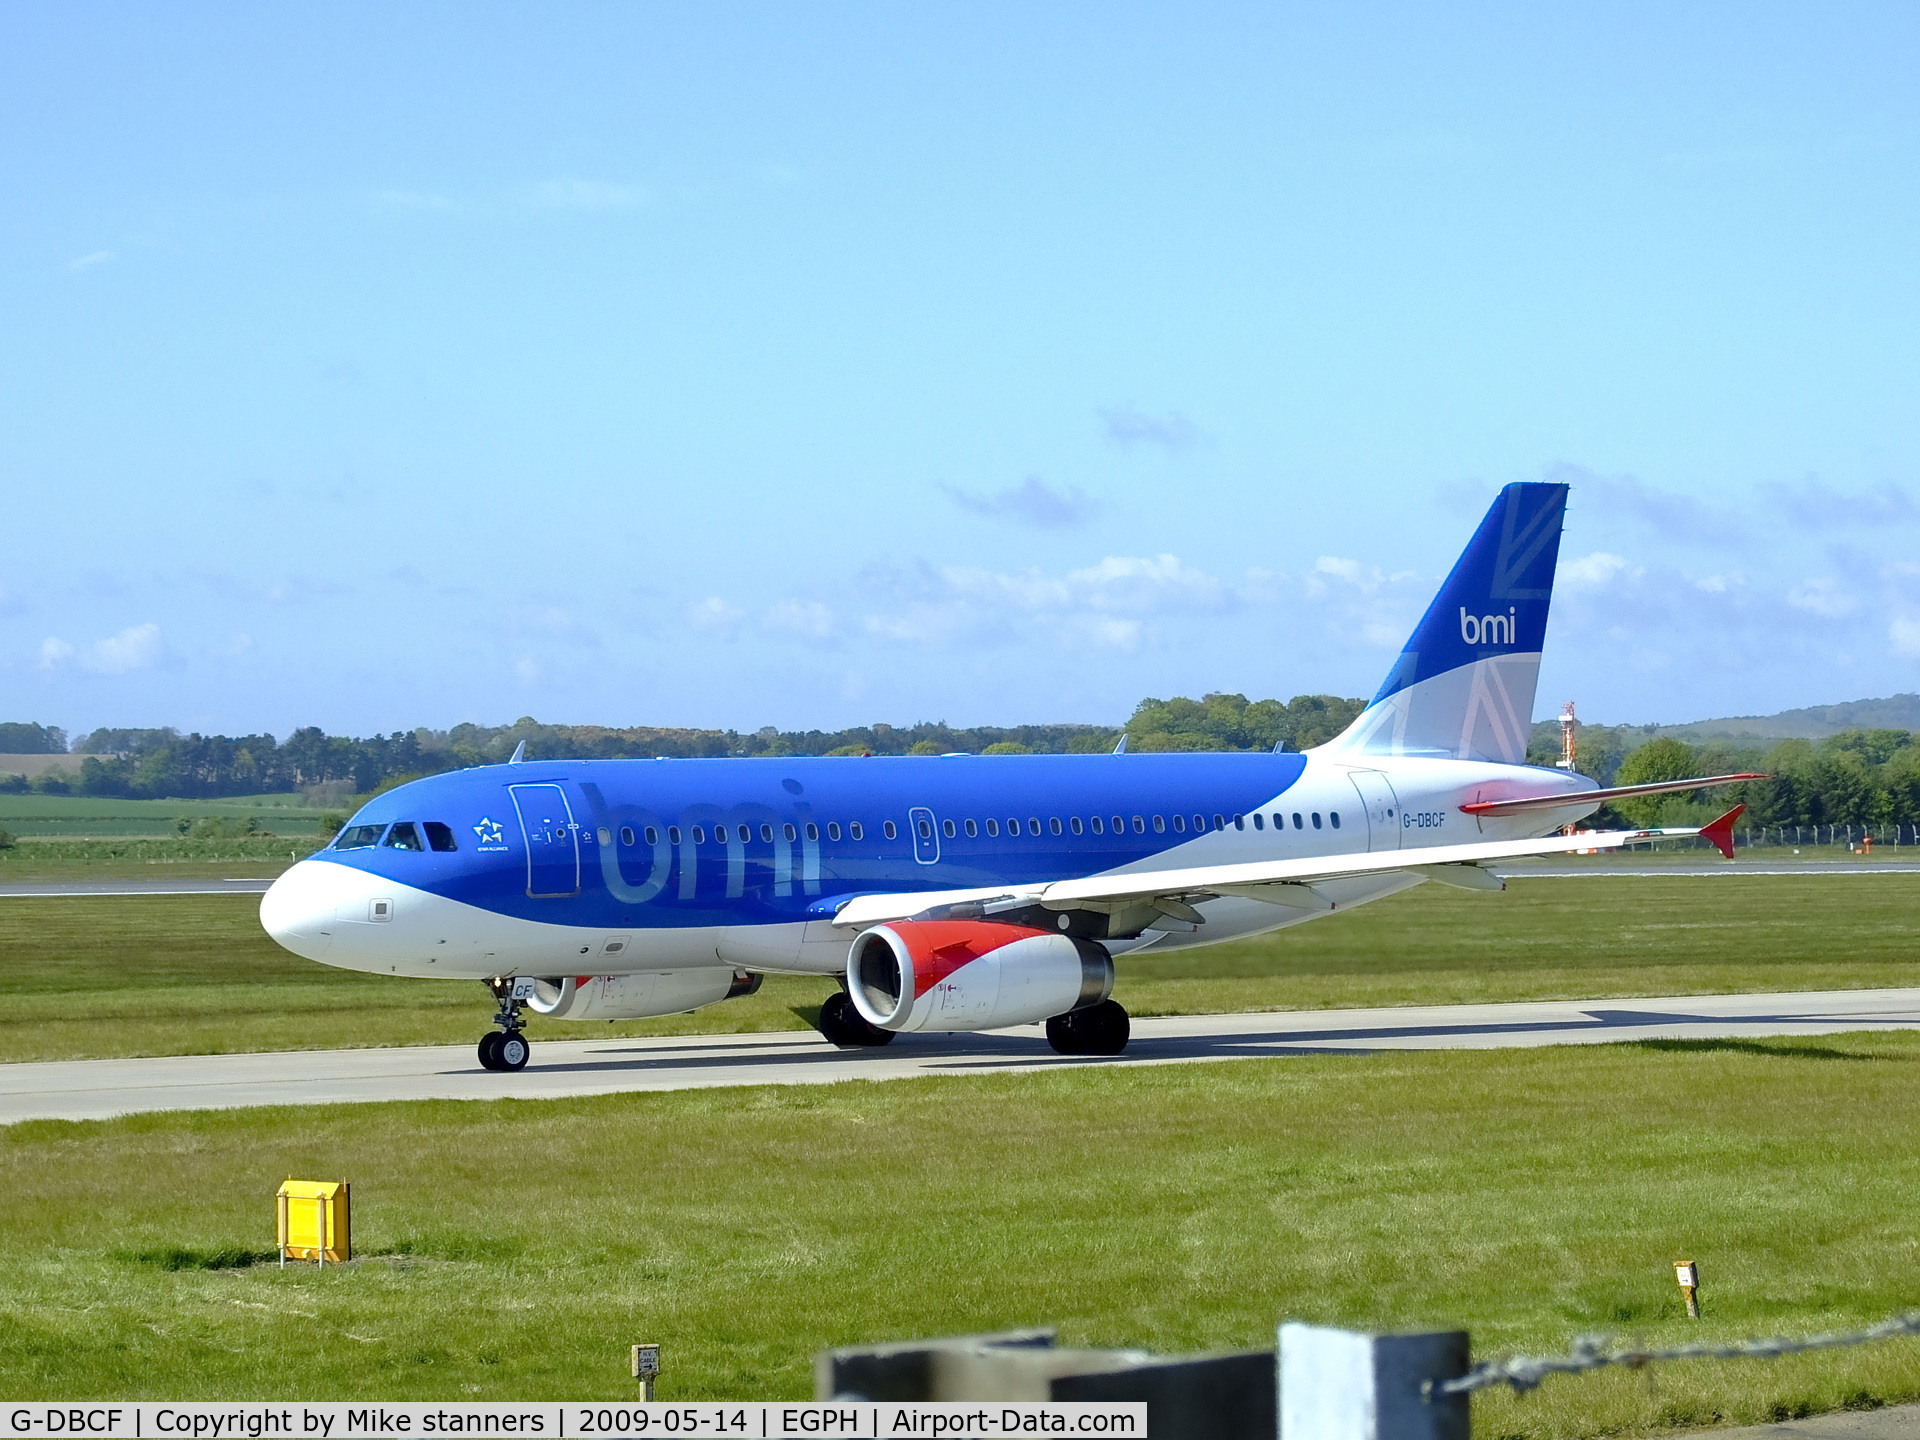 G-DBCF, 2005 Airbus A319-131 C/N 2466, BMI A319 Taxiing to runway 06